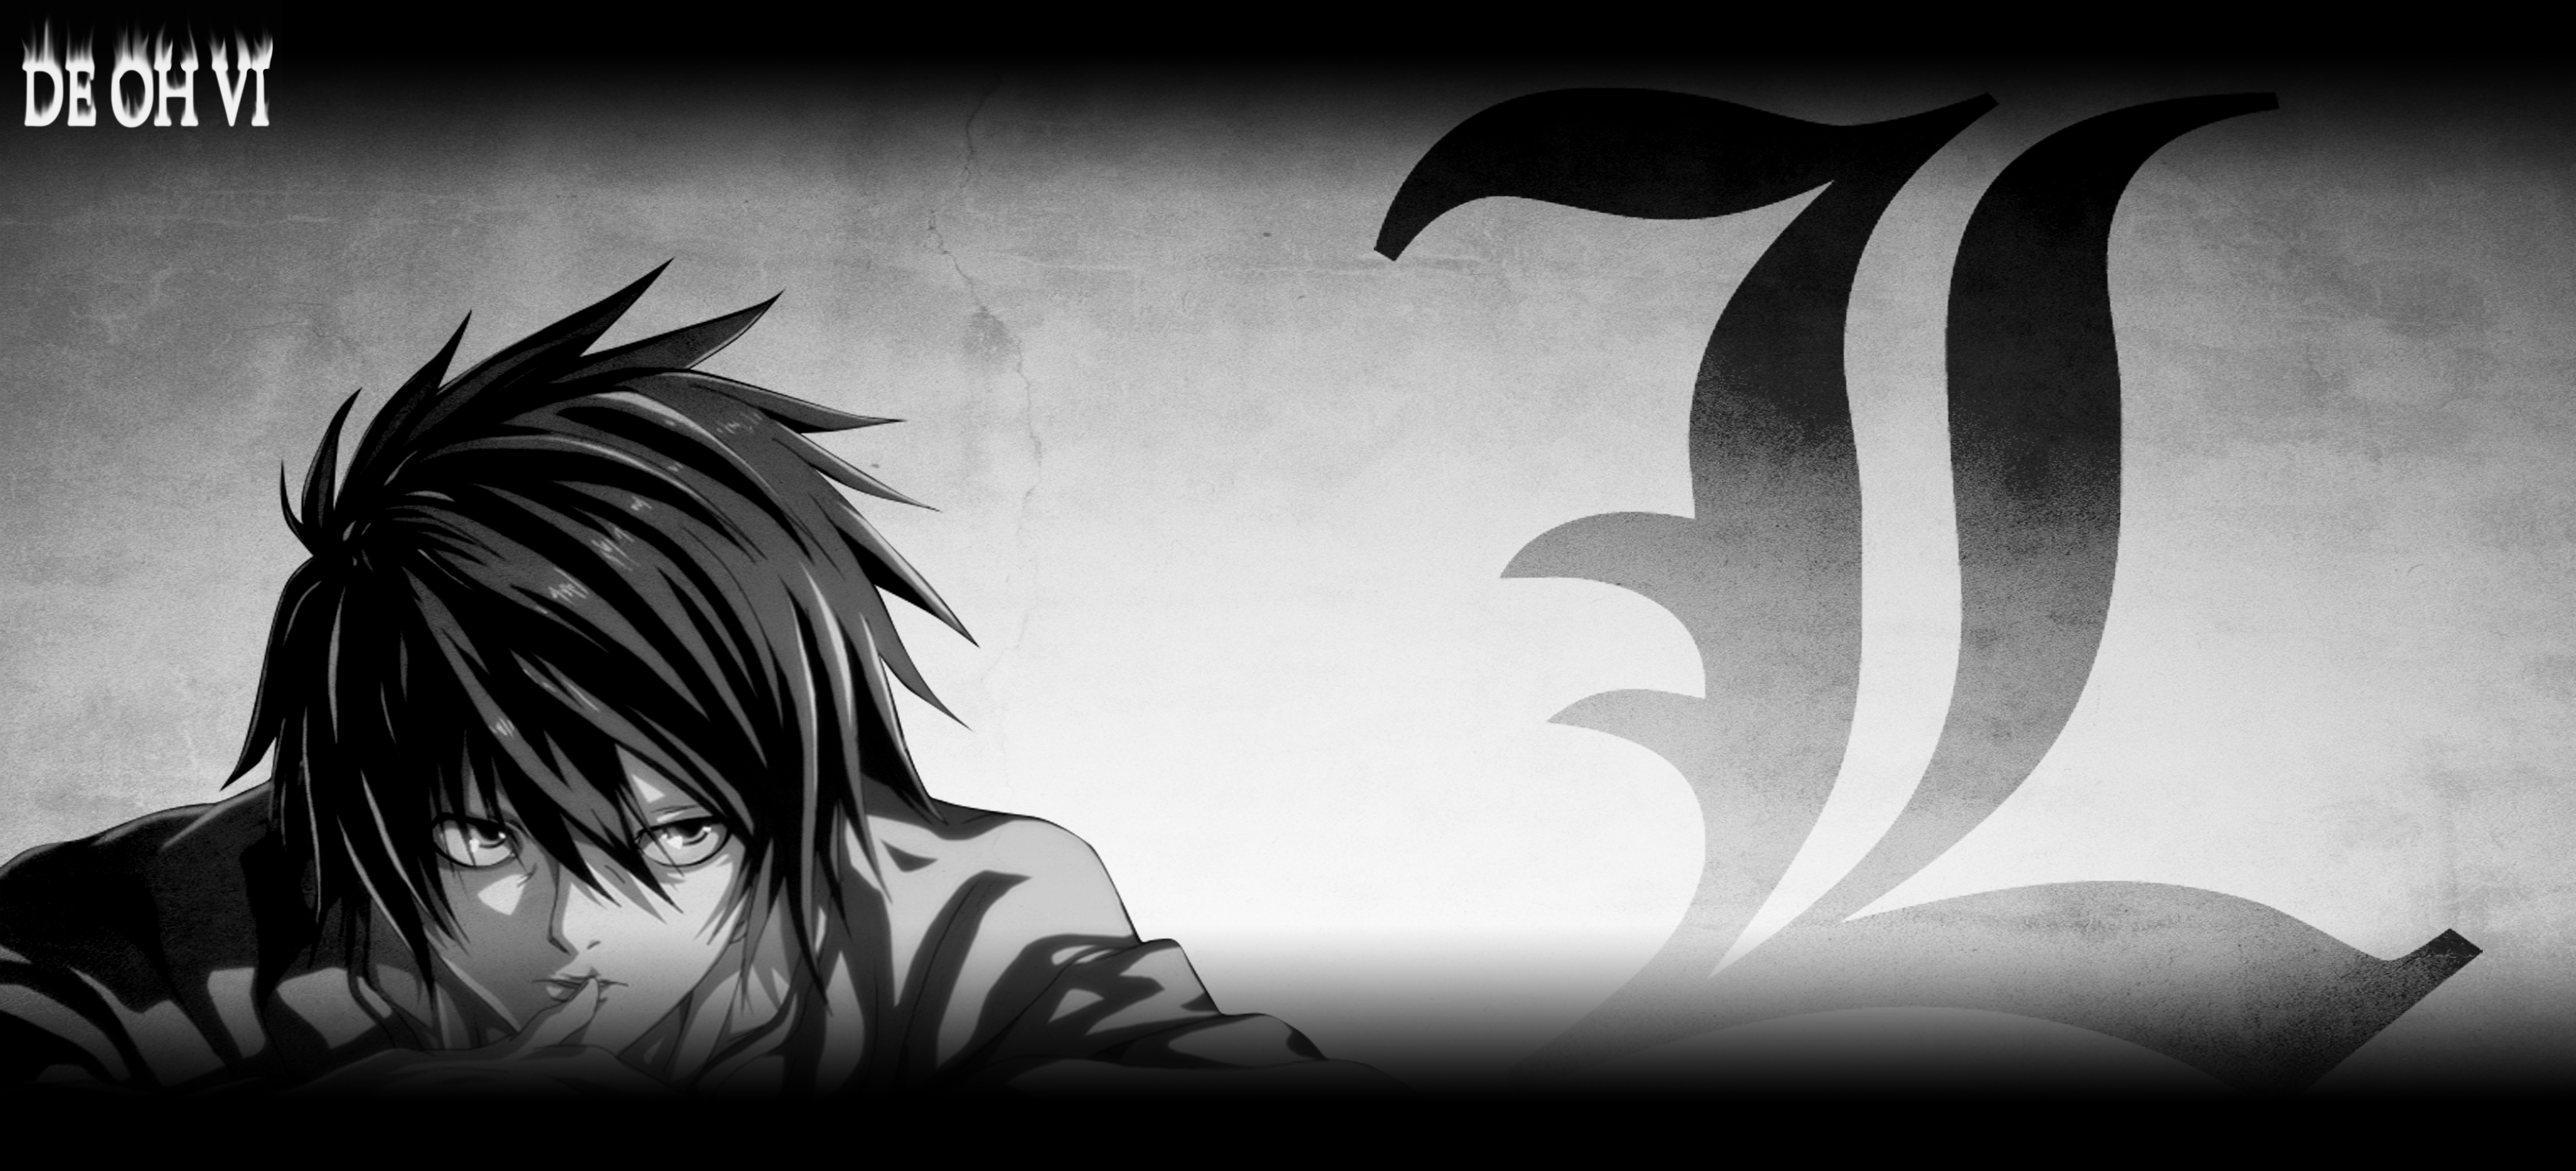 L Death Note Wallpaper High Quality